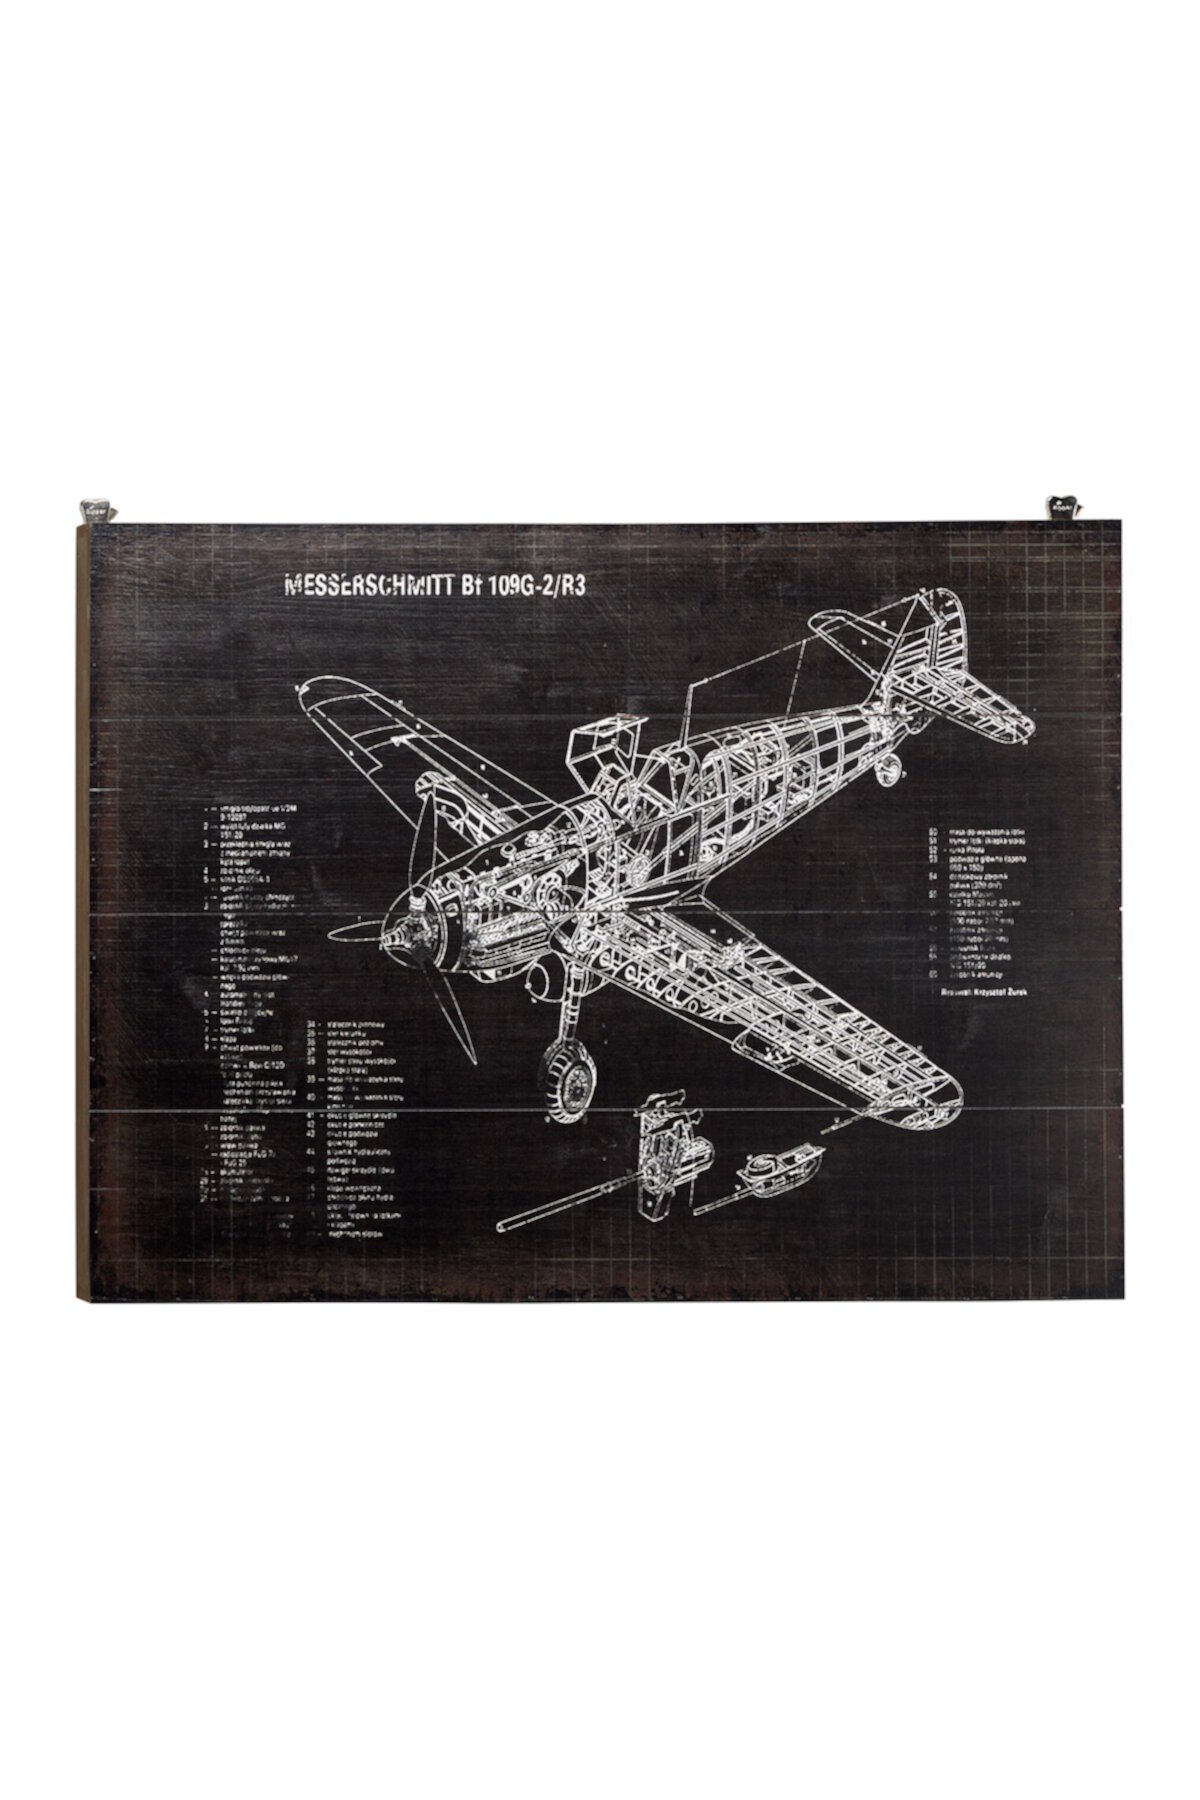 Industrial Style Black And White" Messerschmitt" Airplane Diagram Wood Wall Decor - 31.5" x 23 Willow Row